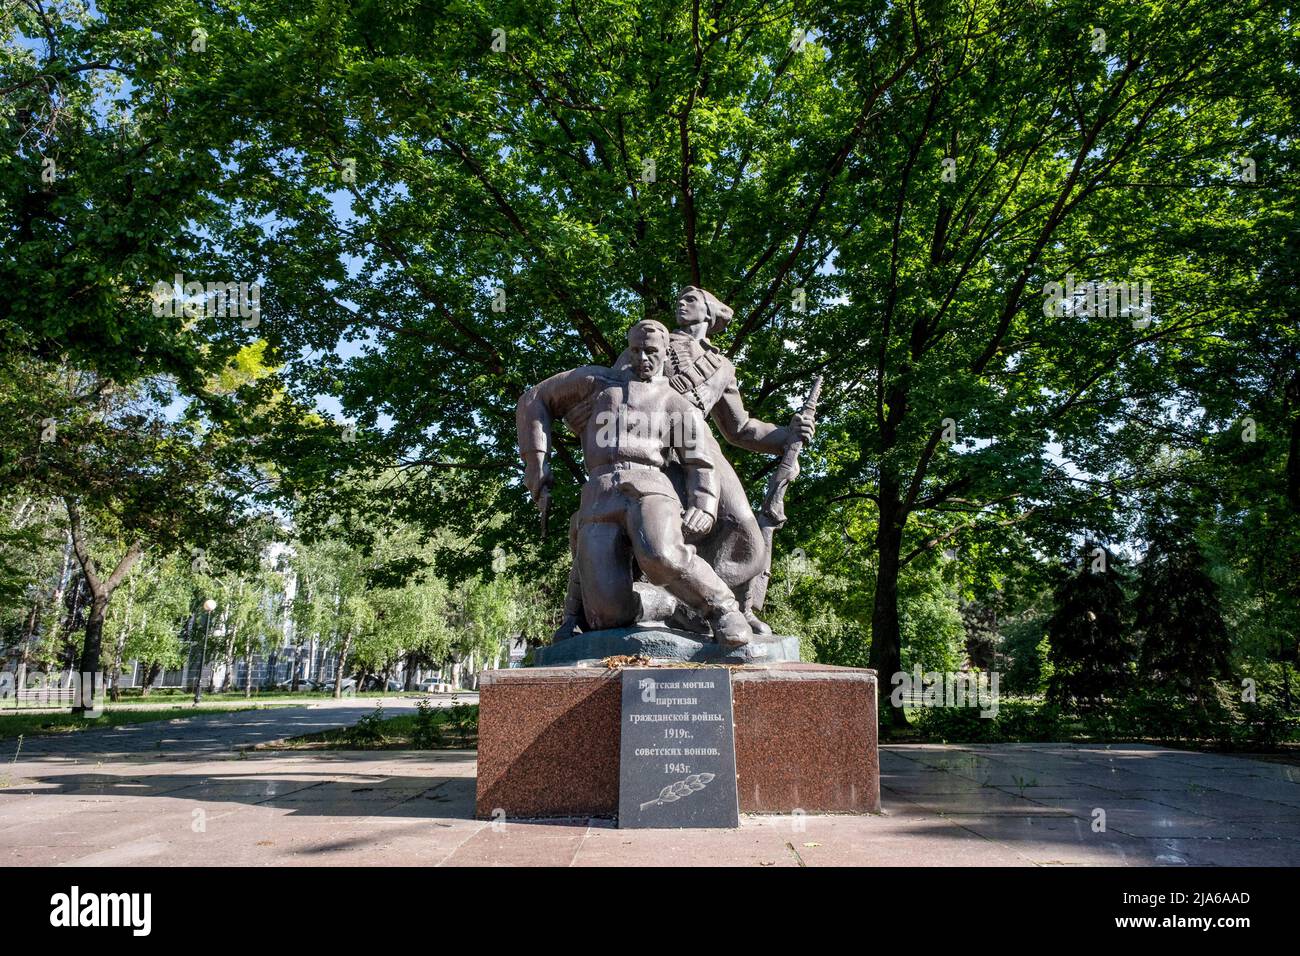 Bakhmut, Dontesk Oblast, Ukraine. 24th May, 2022. A soviet statue can be seen in a park in Bakhmut, Donbas. As Bakhmut stands as a key city to Ukrainian forces in defending Donetsk(Donbas) region, the city is under attack by the Russian troops. The Russian invasion of Ukraine started on February 24, the war that has killed numerous civilians and soldiers. (Credit Image: © Alex Chan Tsz Yuk/SOPA Images via ZUMA Press Wire) Stock Photo